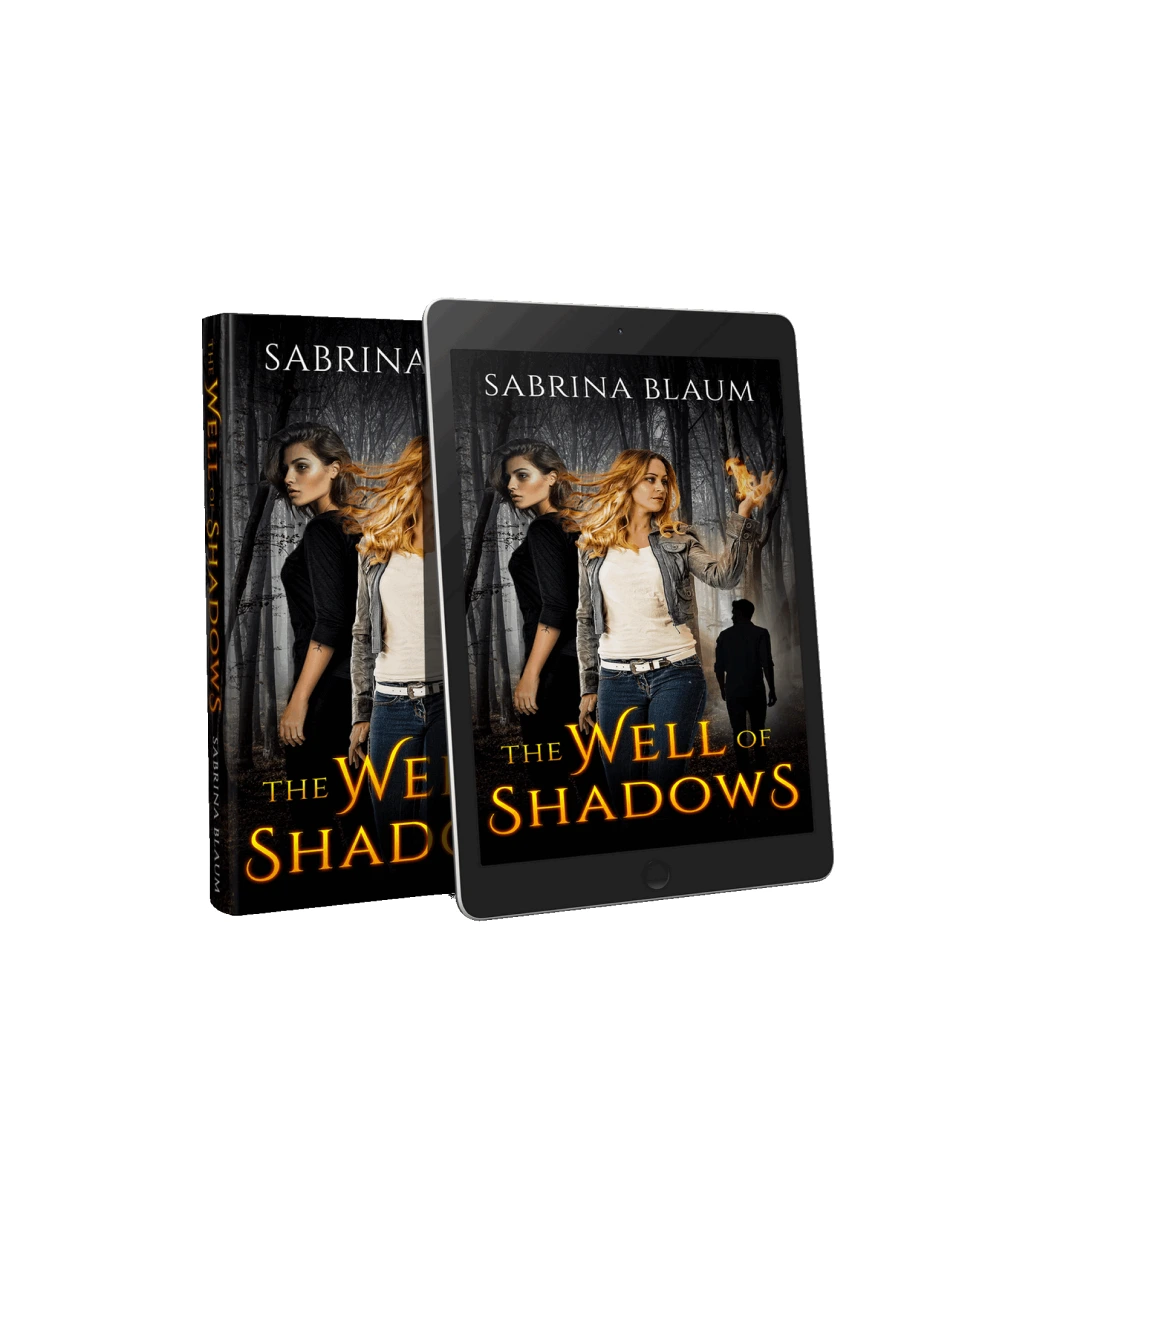 Well of Shadows book cover